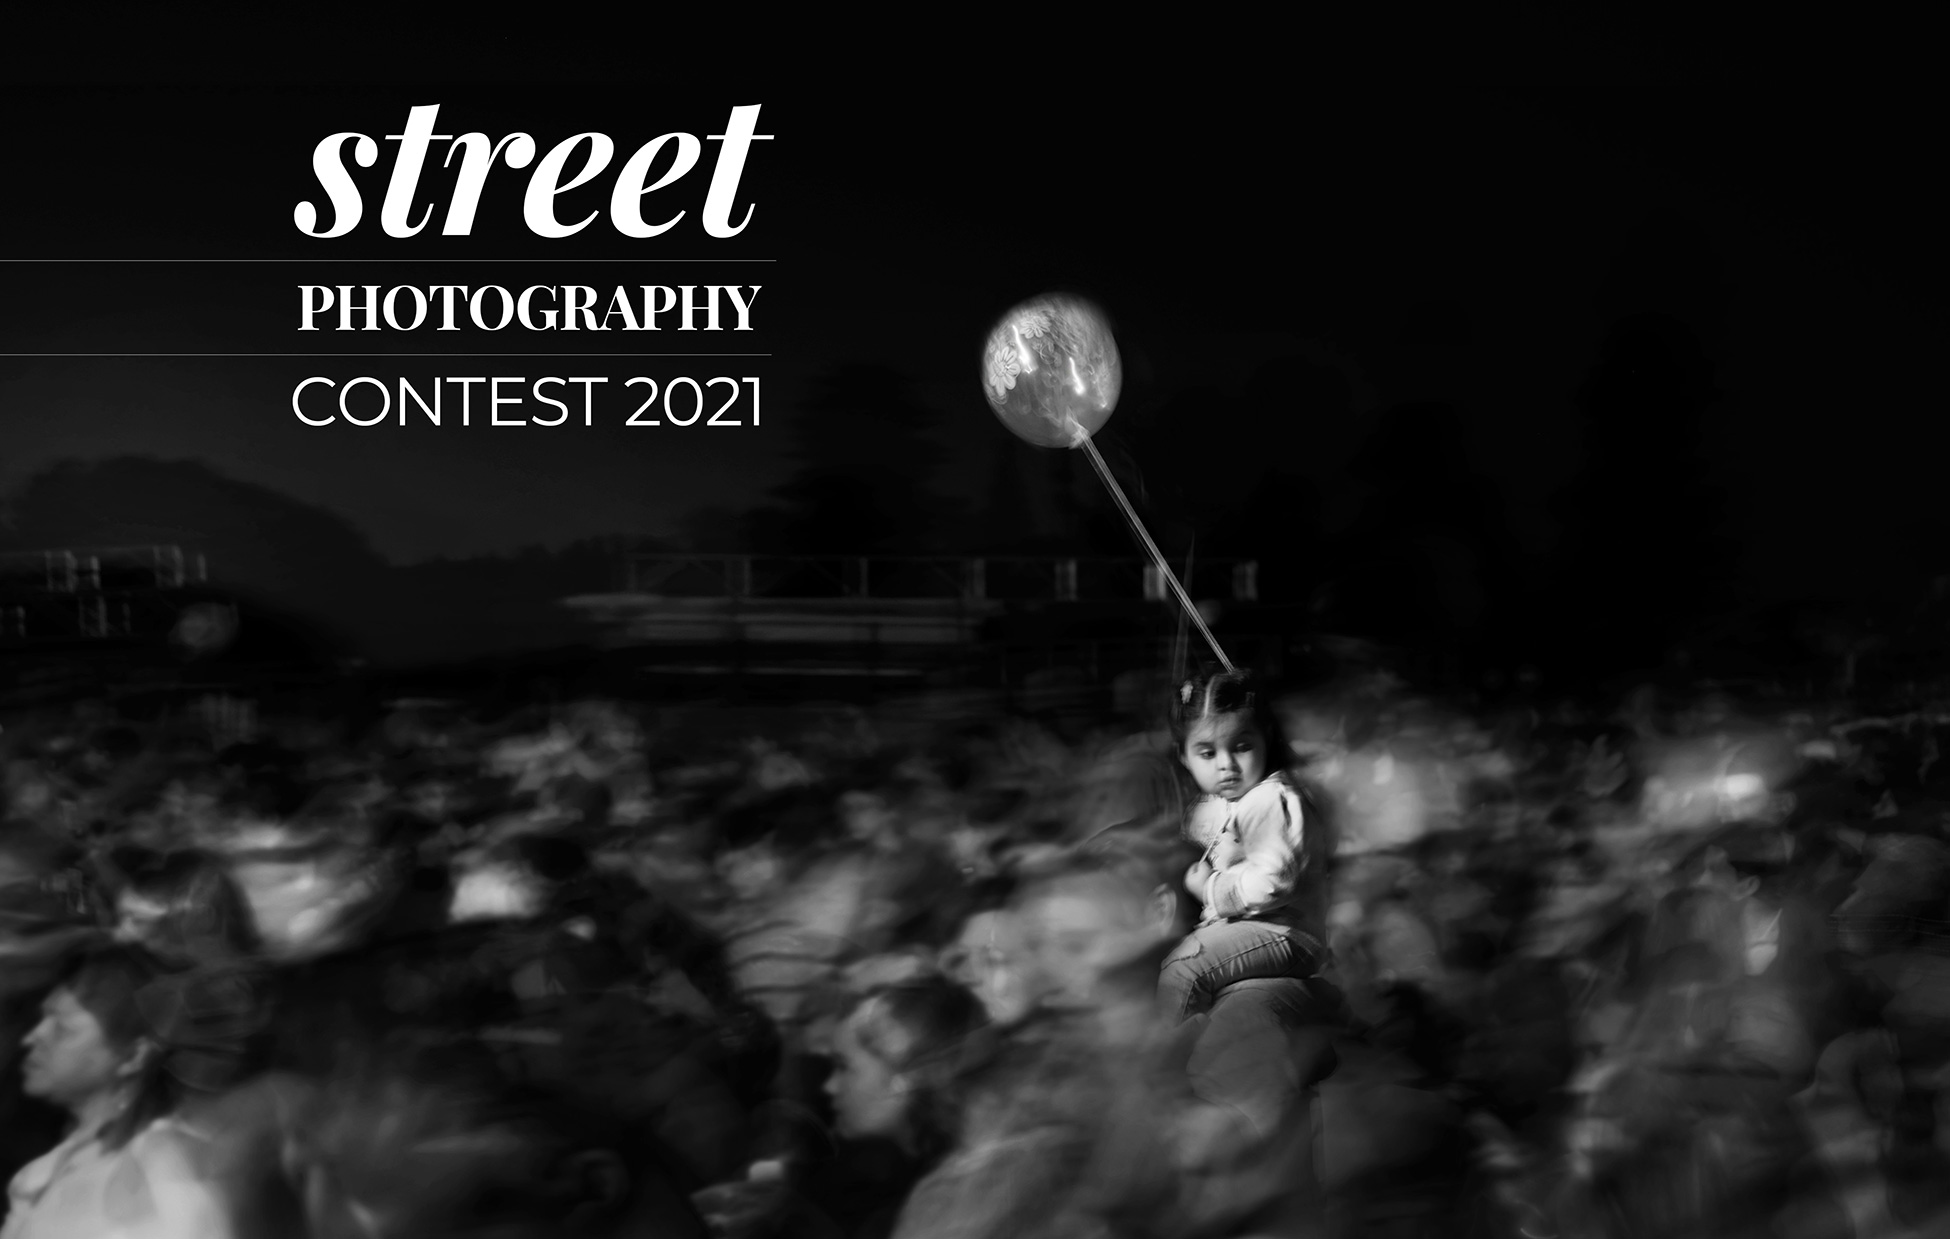 Street Photography Contest 2021 – Submissions Closed